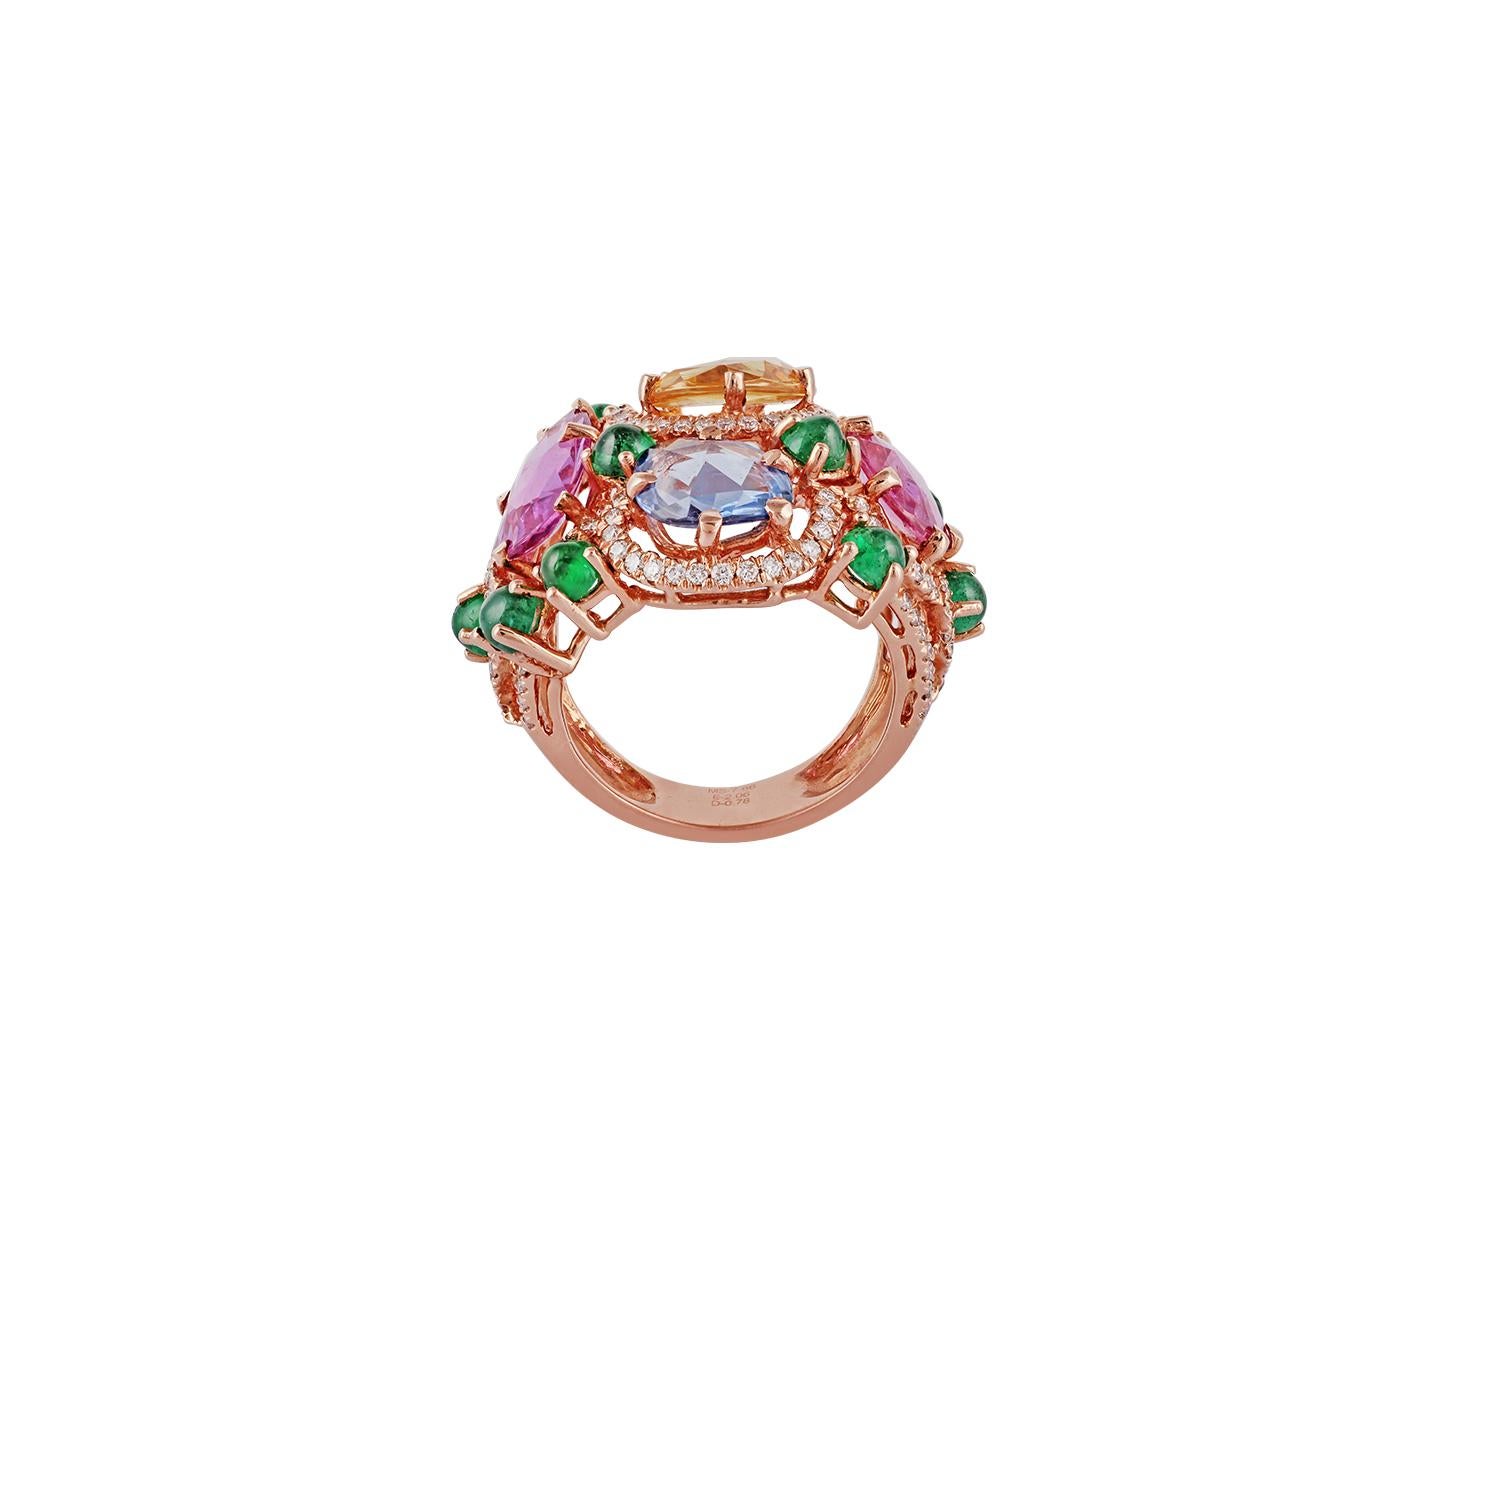 Rose Cut Multicolored Sapphire, Emerald and Diamond Ring Studded in Rose Gold